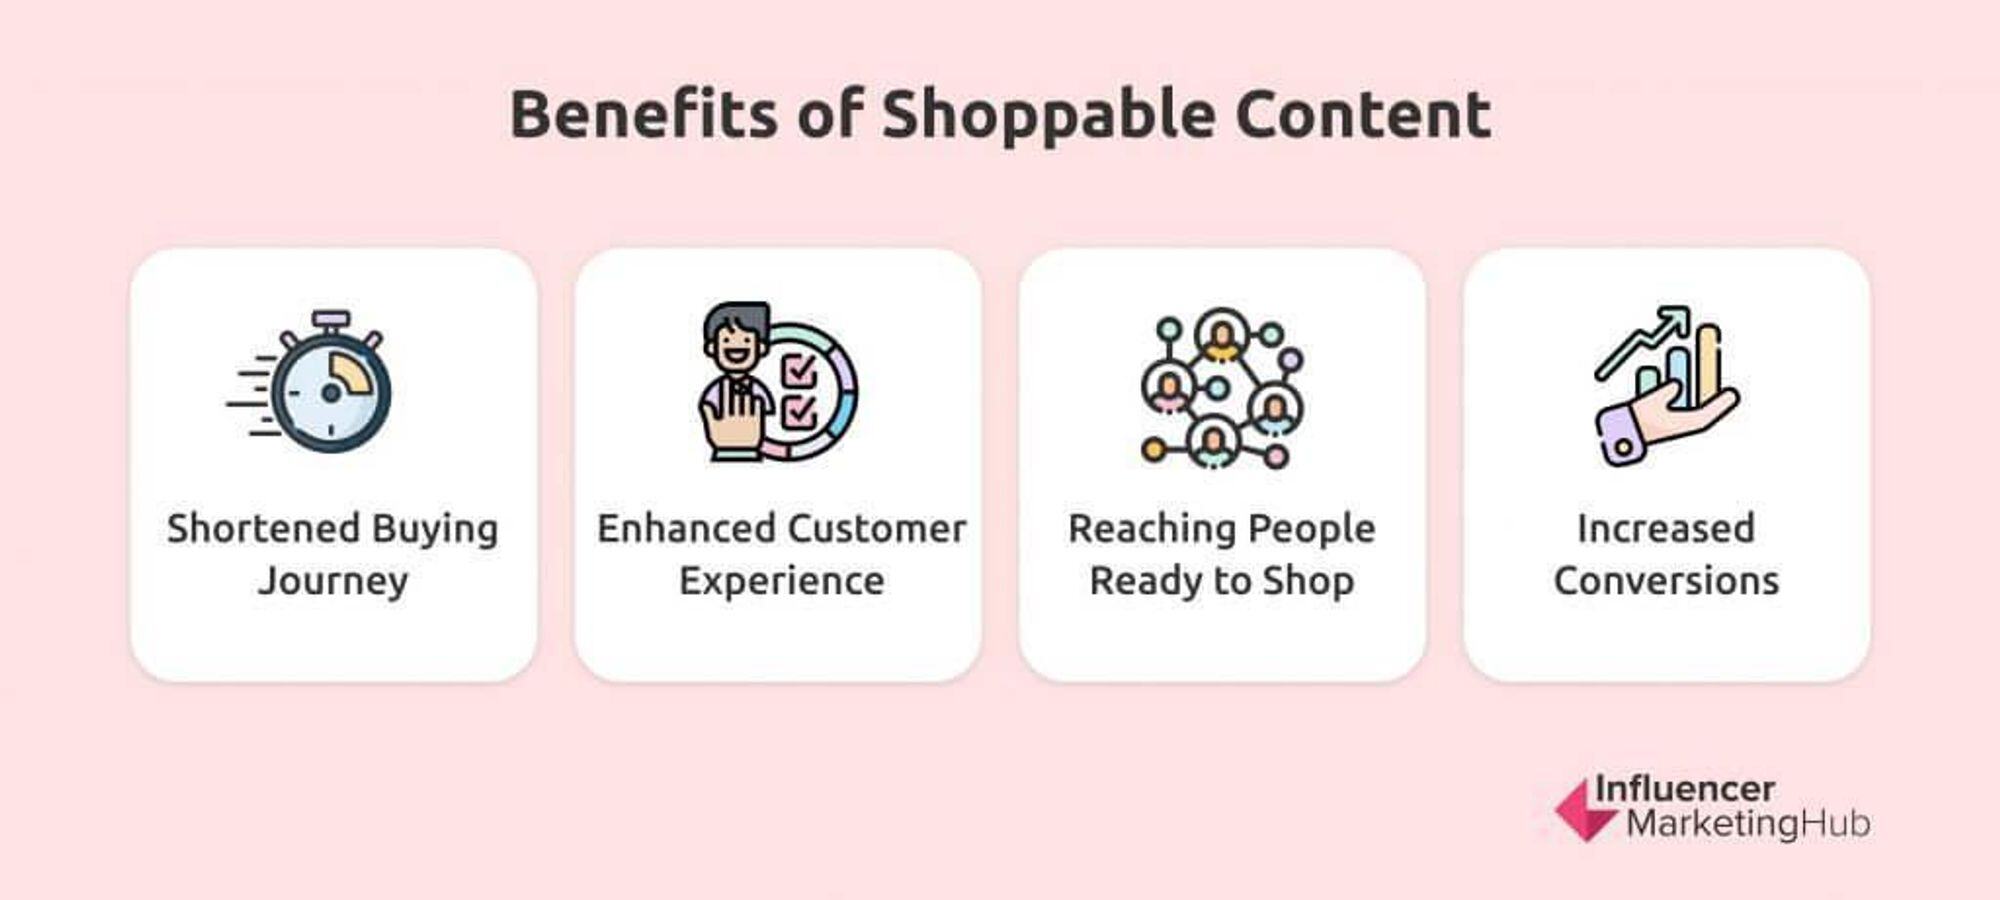 Four benefits of shoppable content